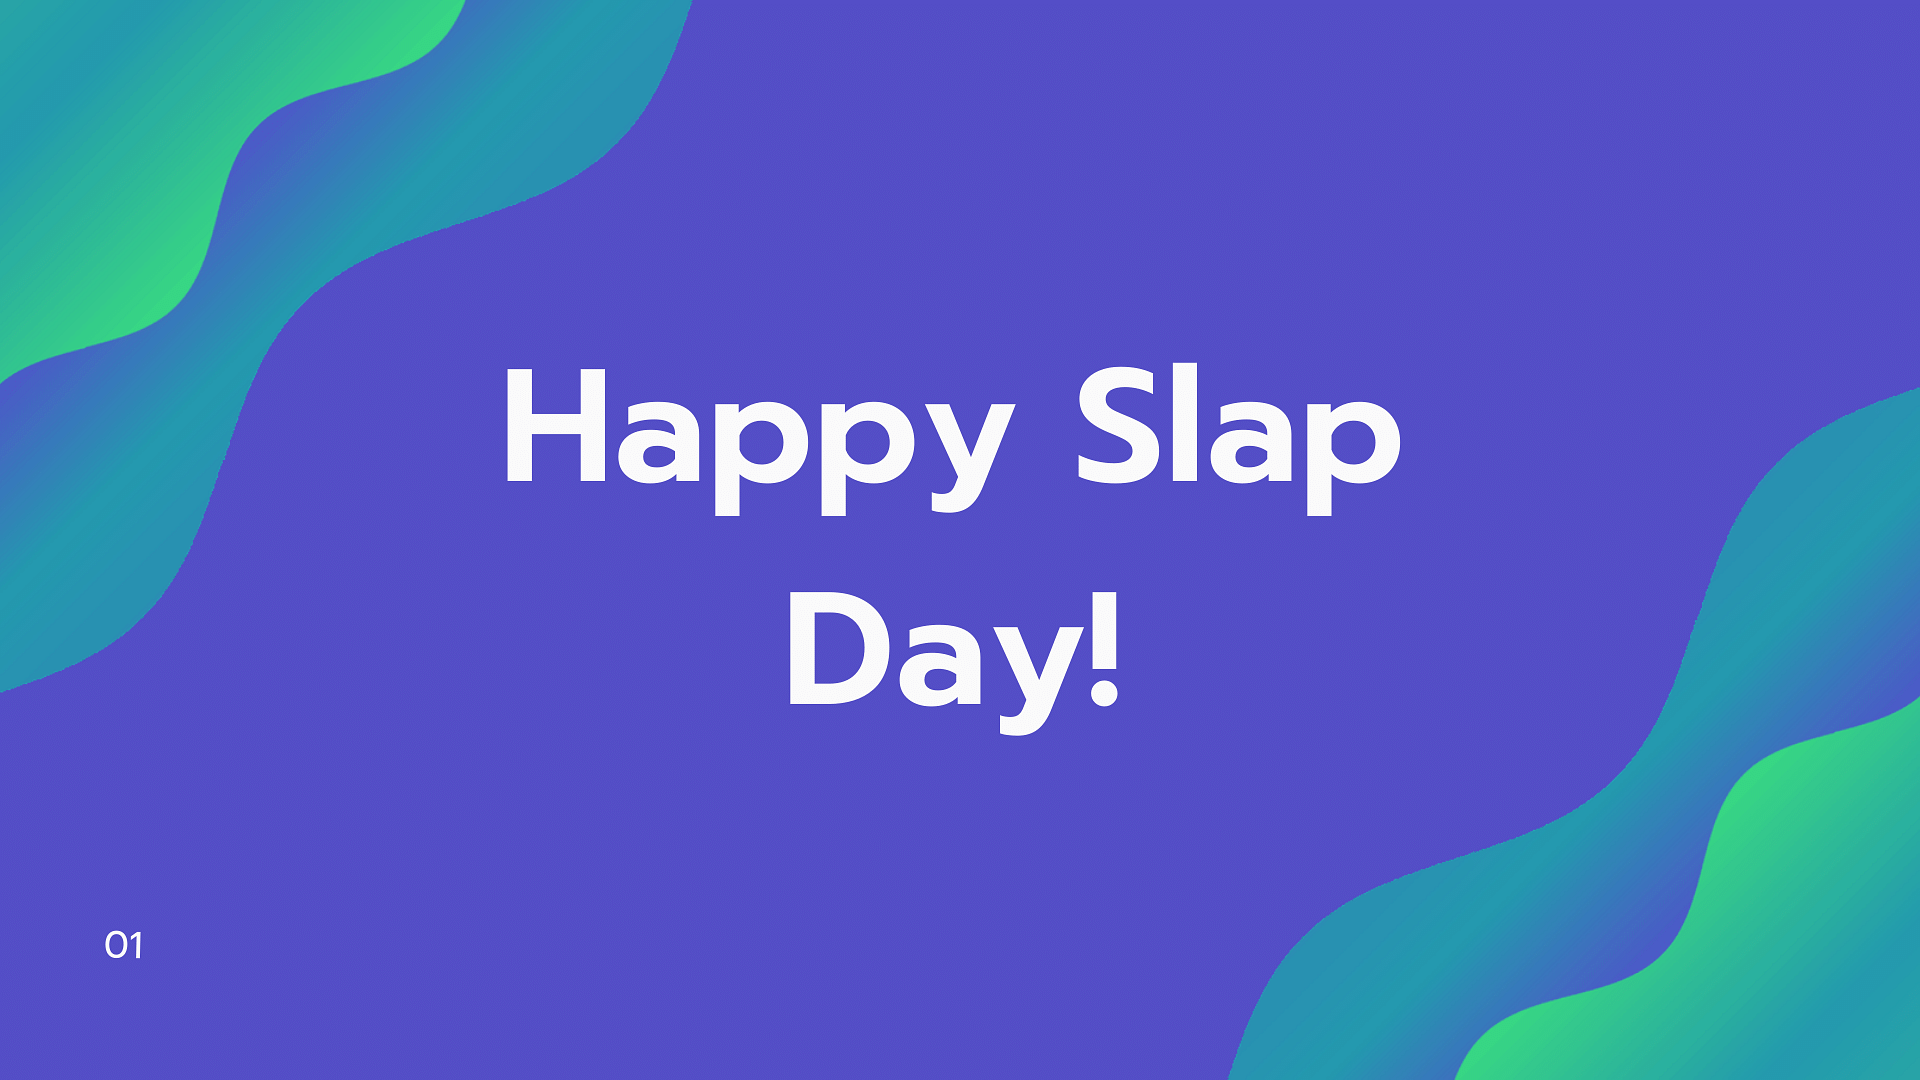 Happy Slap Day 21 Funny Quotes Slap Day Memes And Wishes To Send On Whatsapp Facebook Instagram And Upload As Whatsapp And Instagram Story